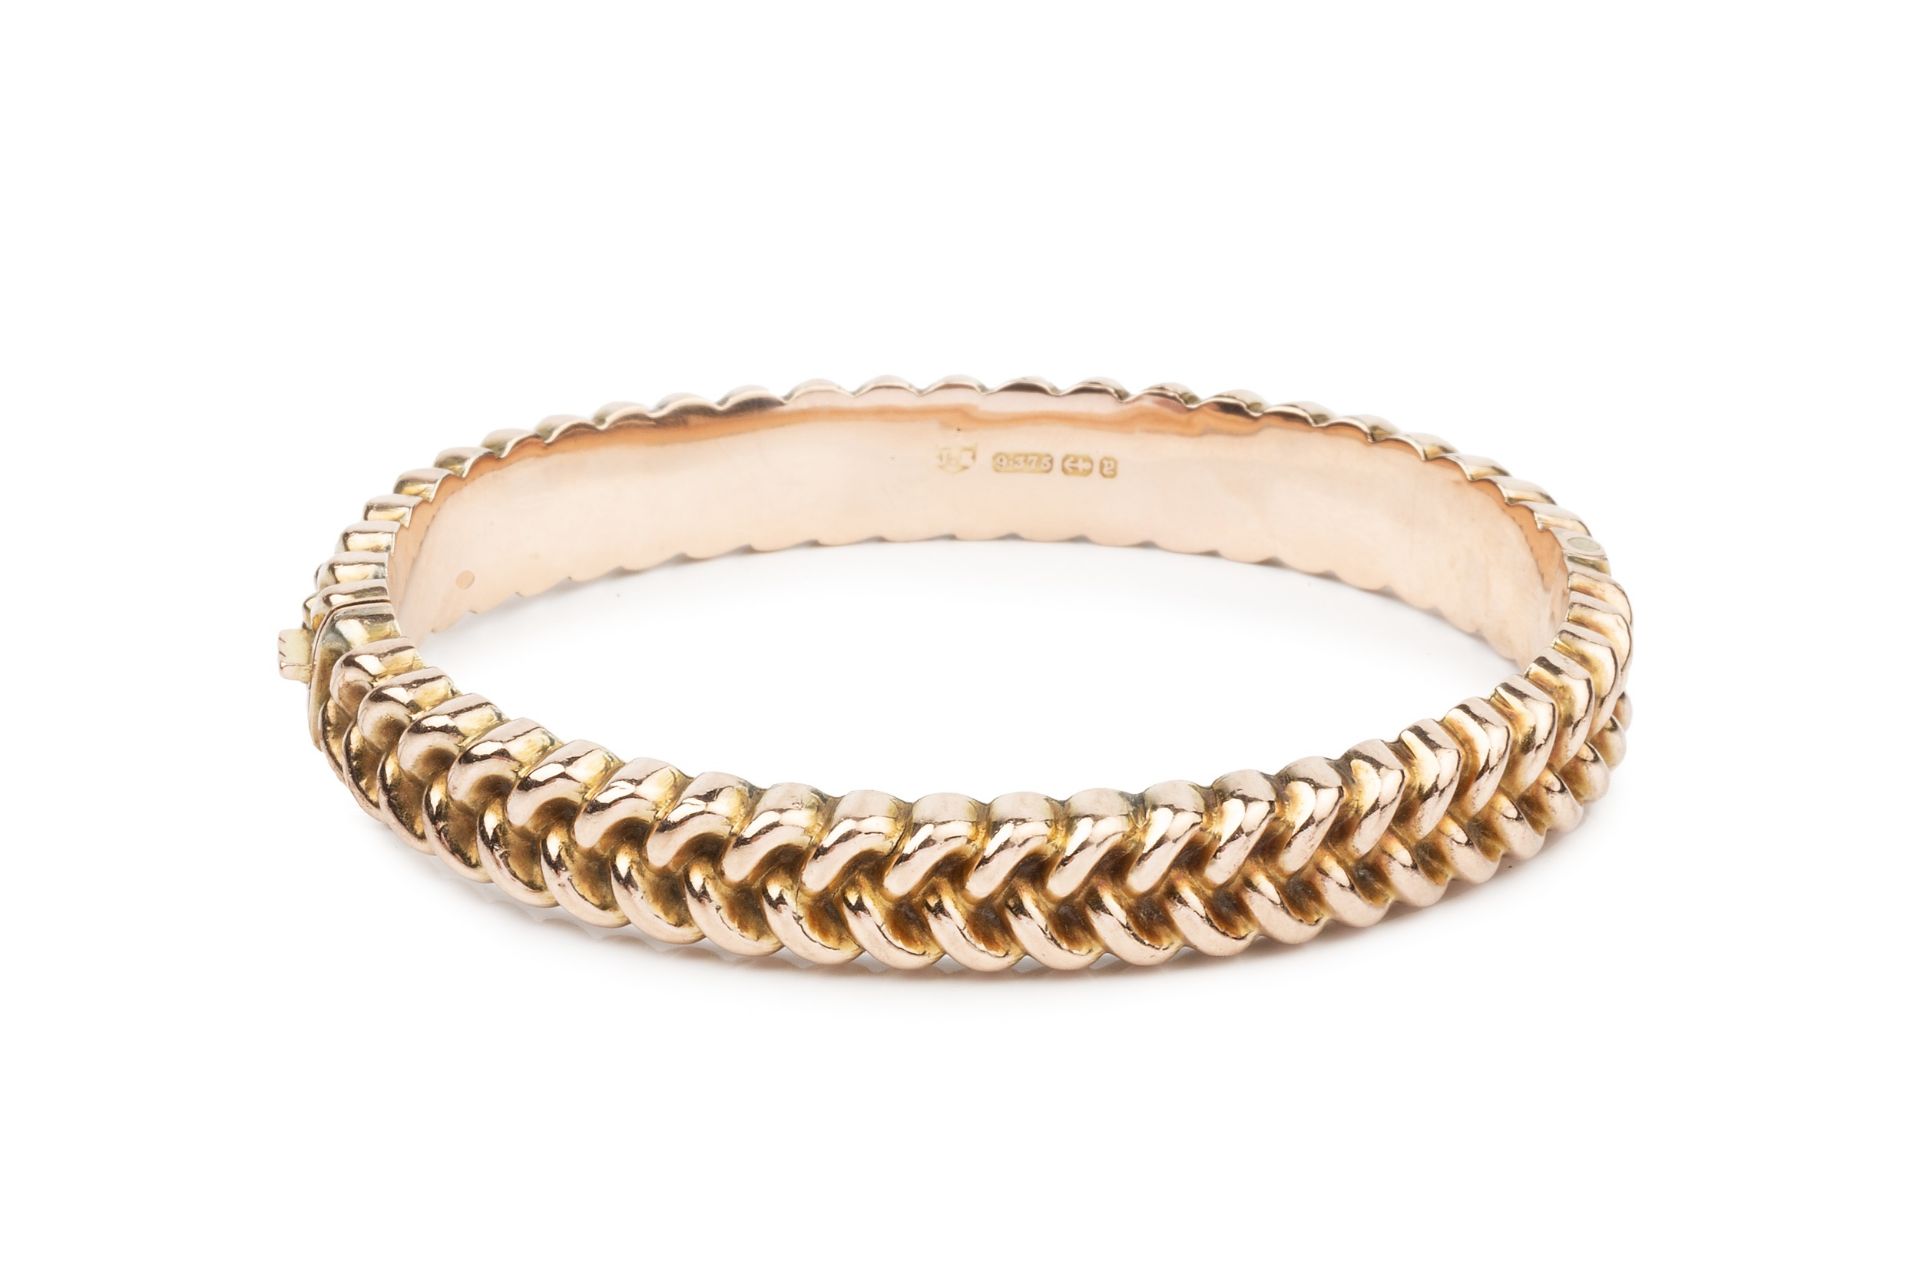 A Victorian 9ct rose gold hinged bangle, with an embossed bead and weave design, hallmarked for